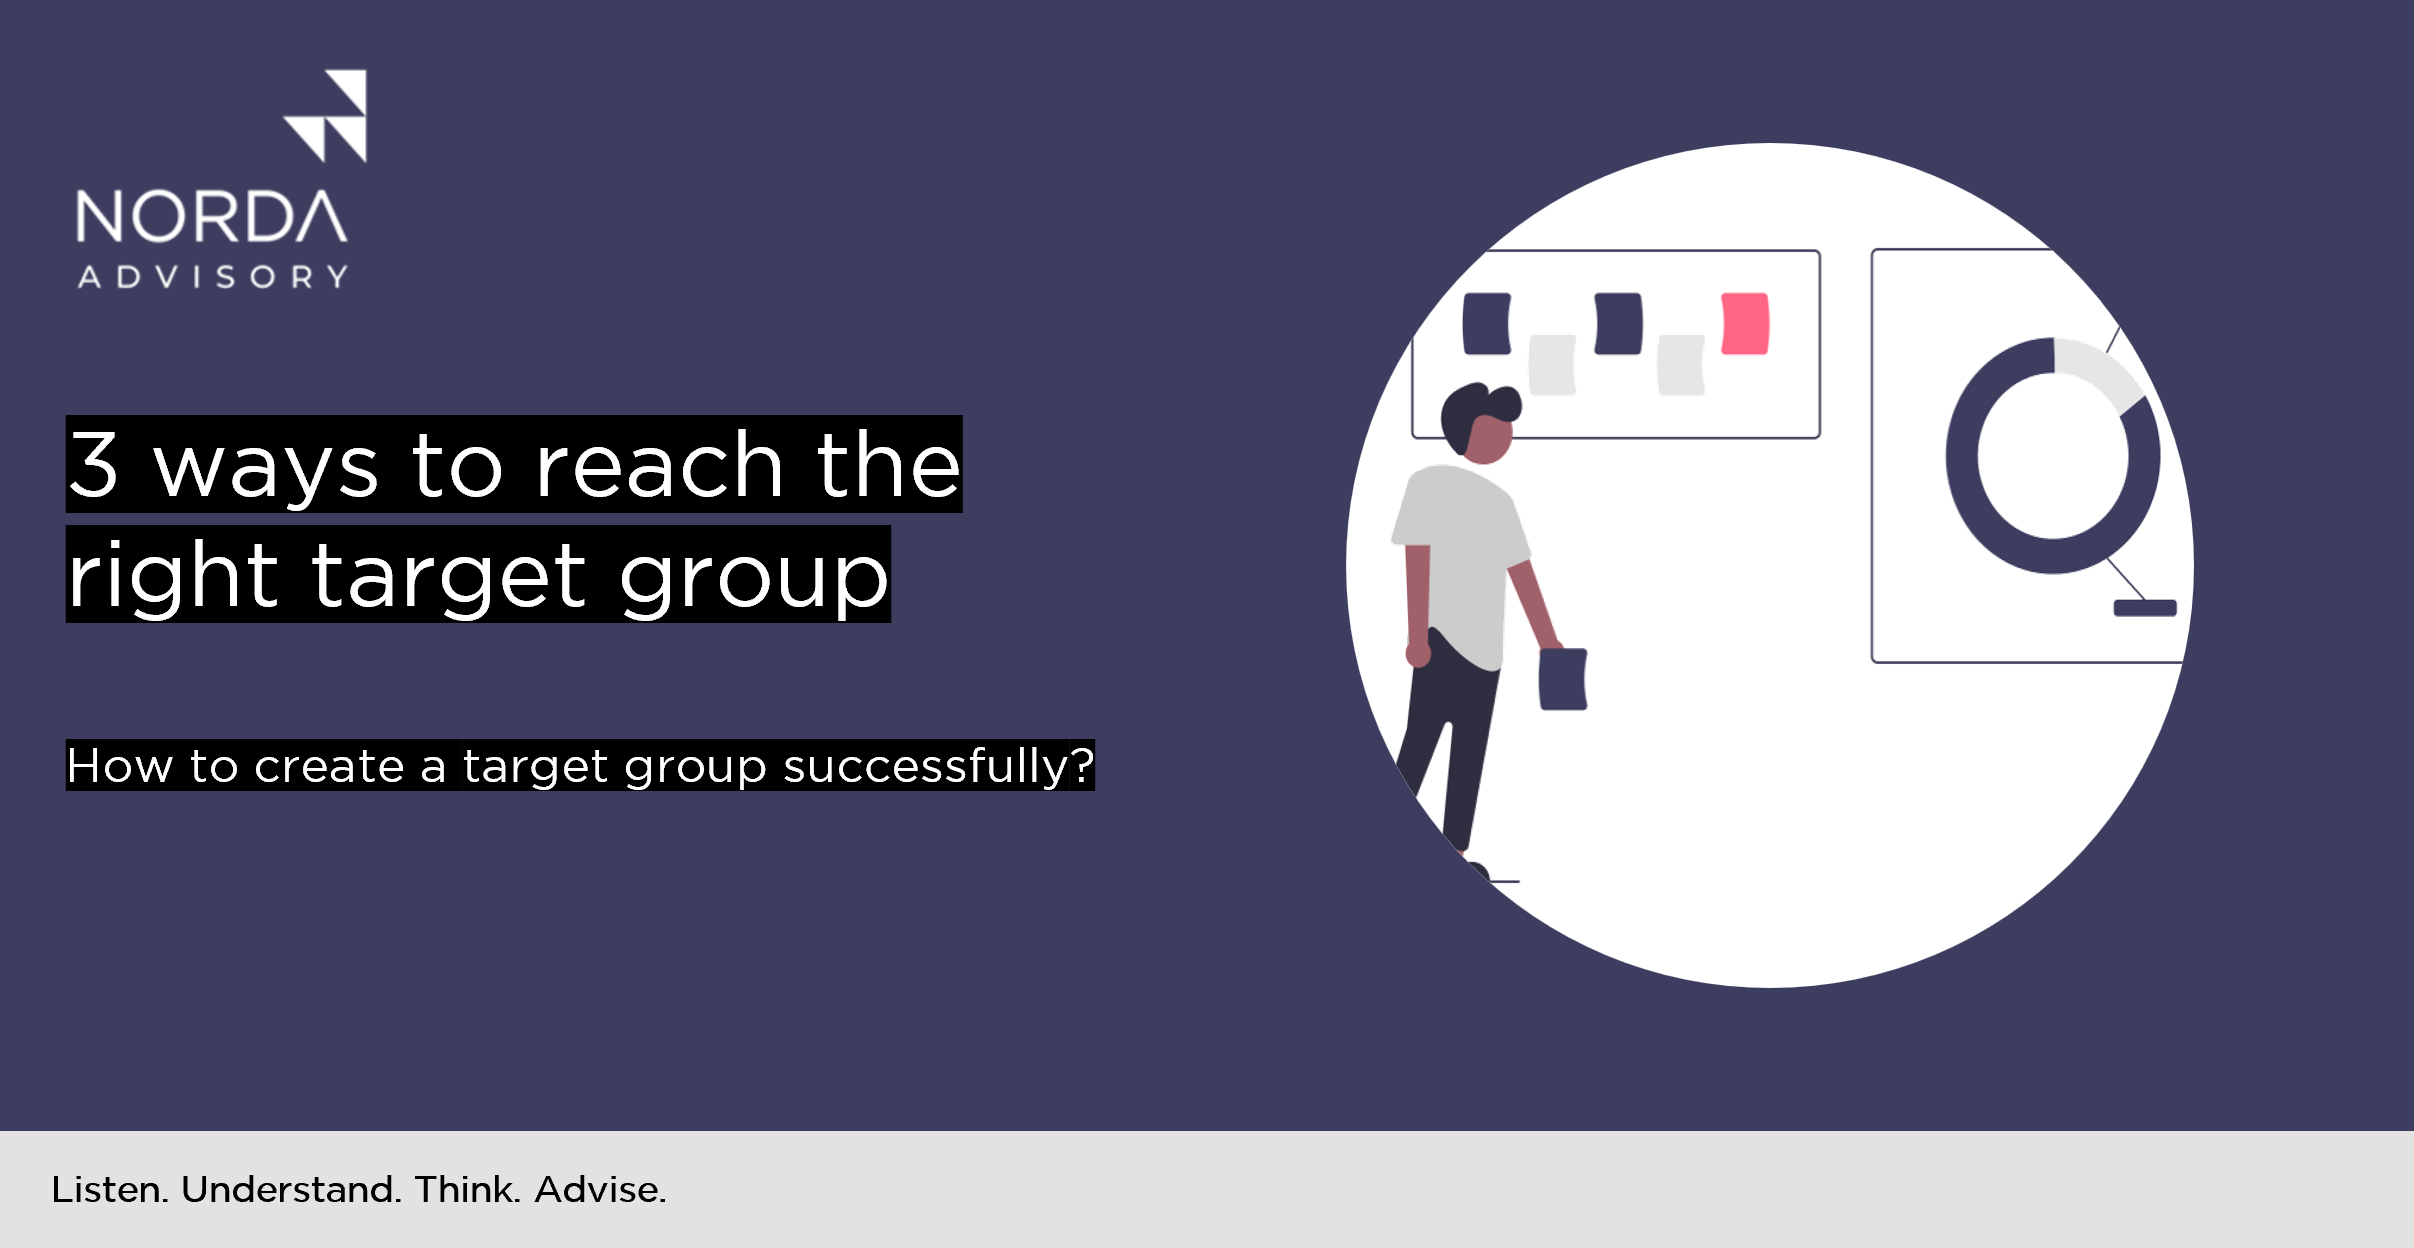 3 ways to reach the right target group